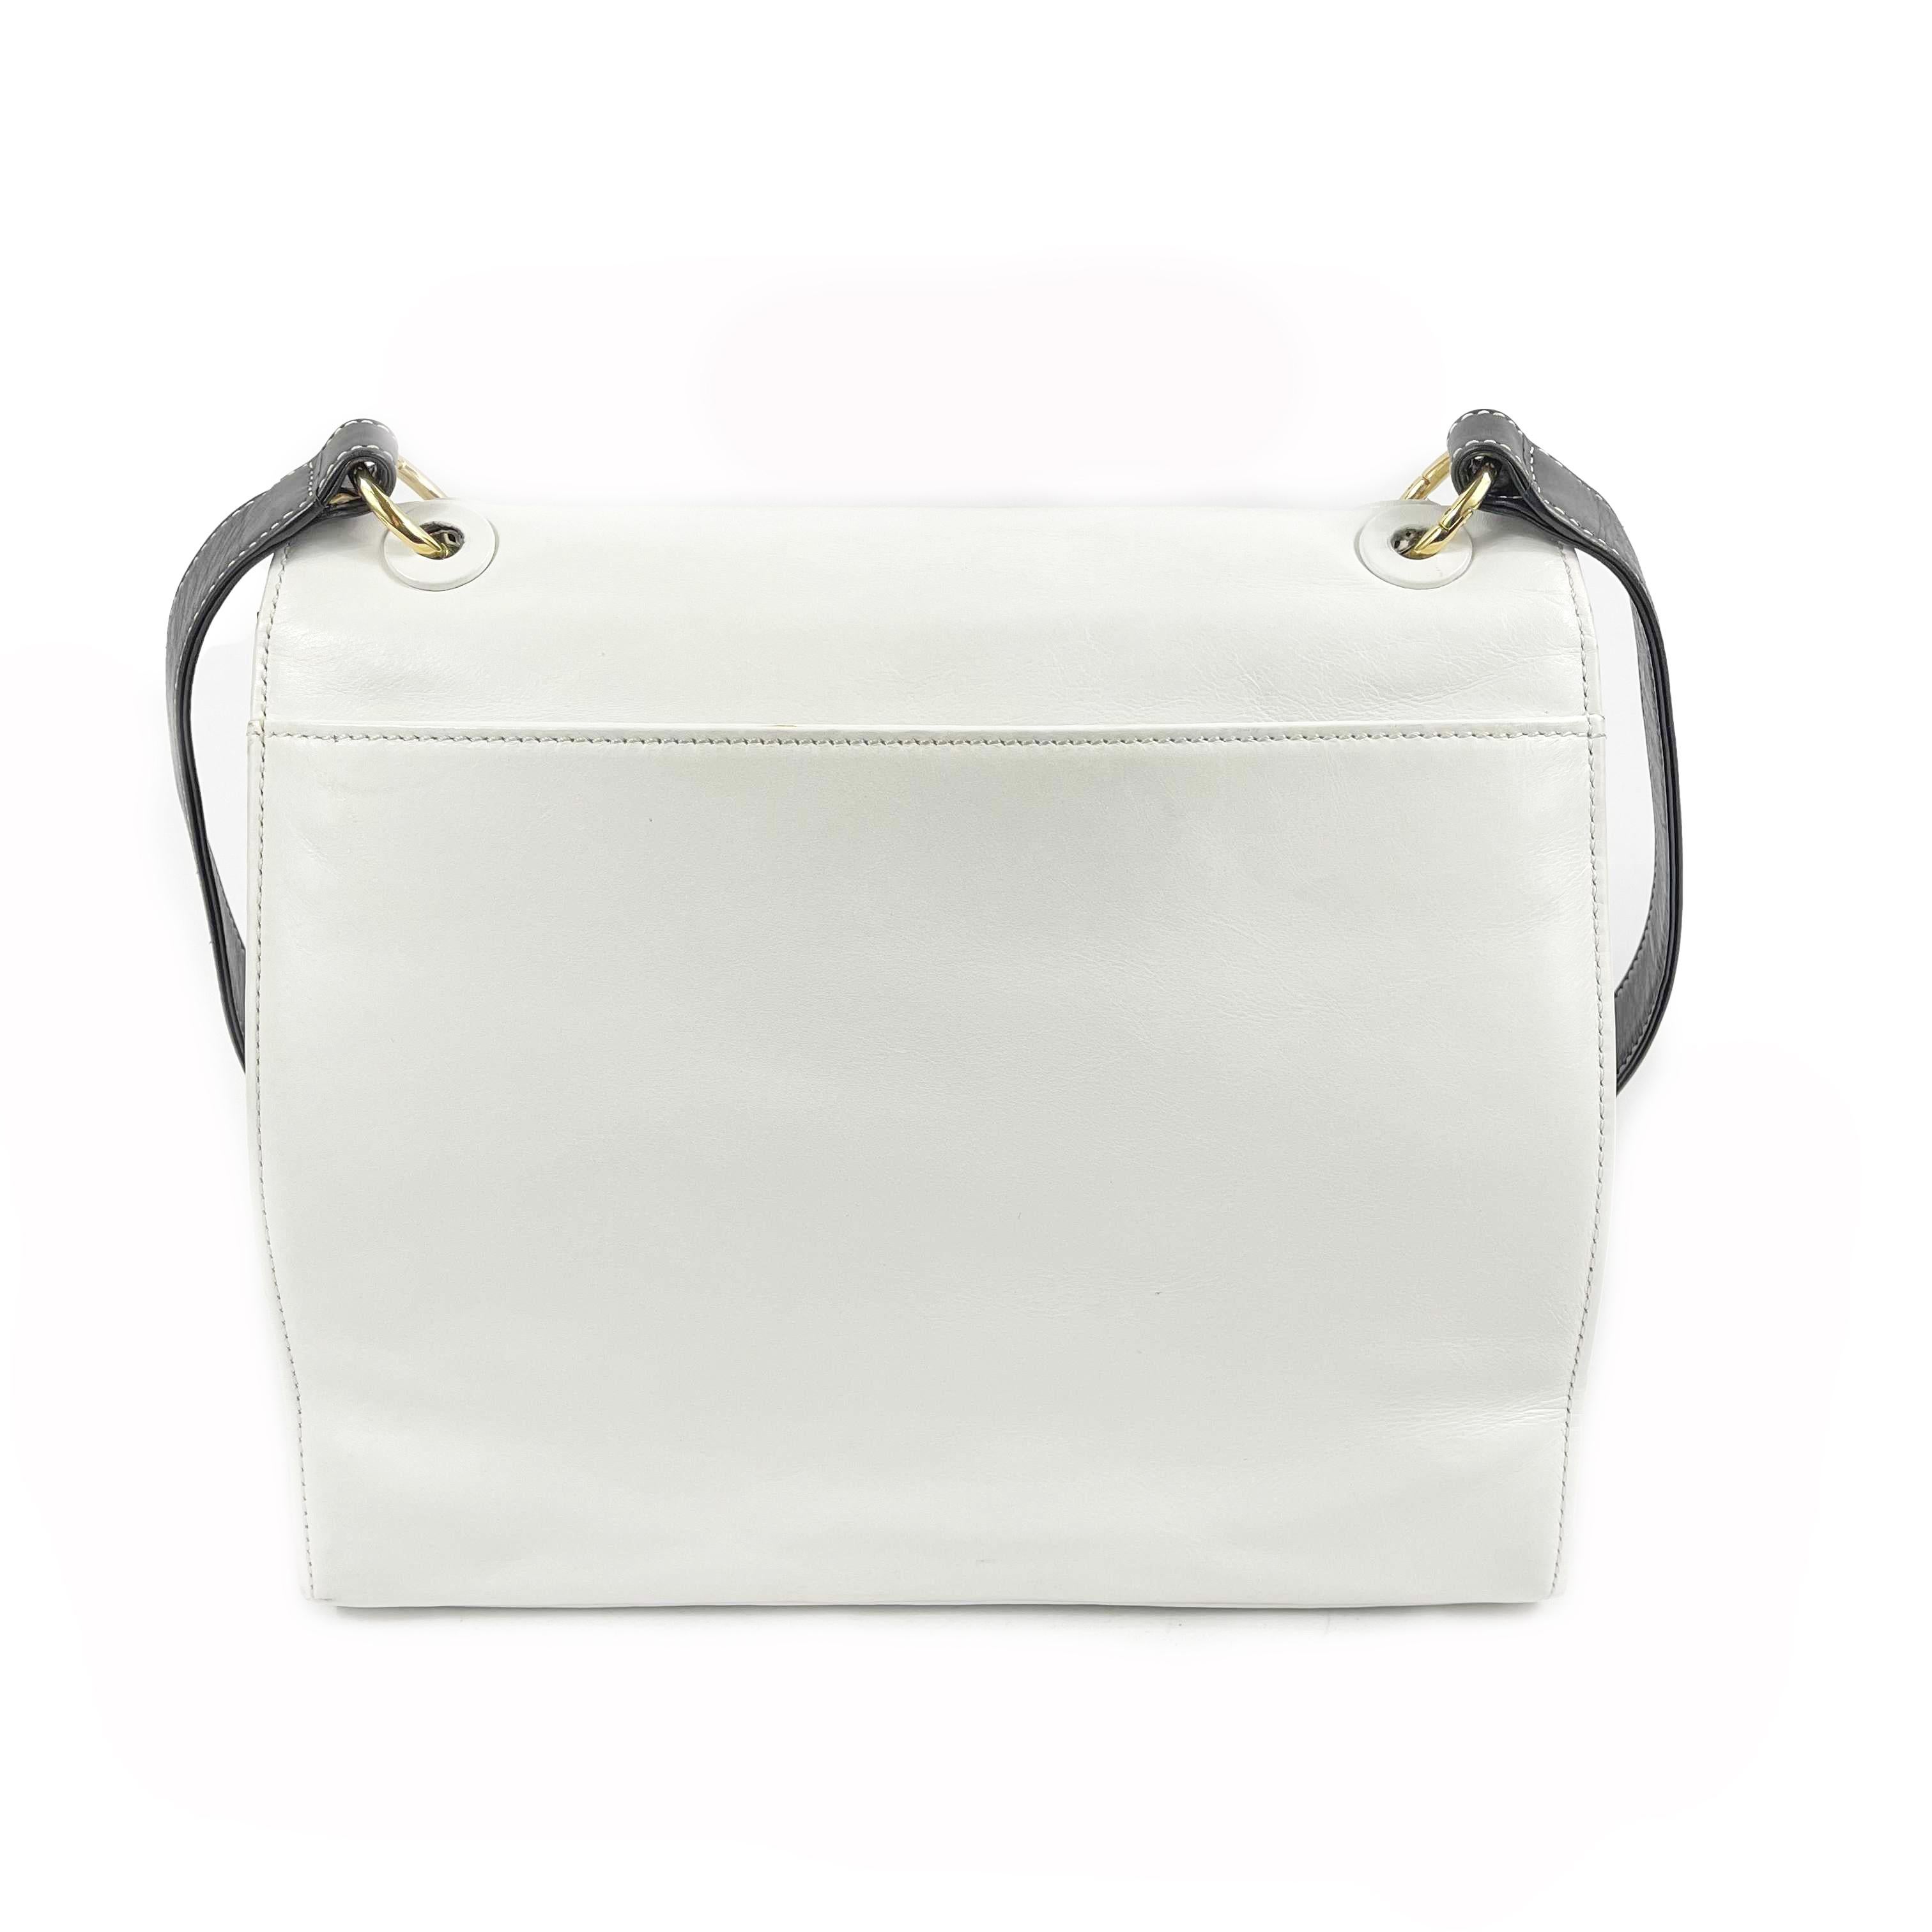 CHANEL - Vintage Medium Classic Flap - CC Lock White / Black Messenger Bag 

Description

Vintage from late 1990s.
This Chanel Classic White and Black Messenger bag features the iconic interlocking CC turn-lock closure, which opens the top flap to